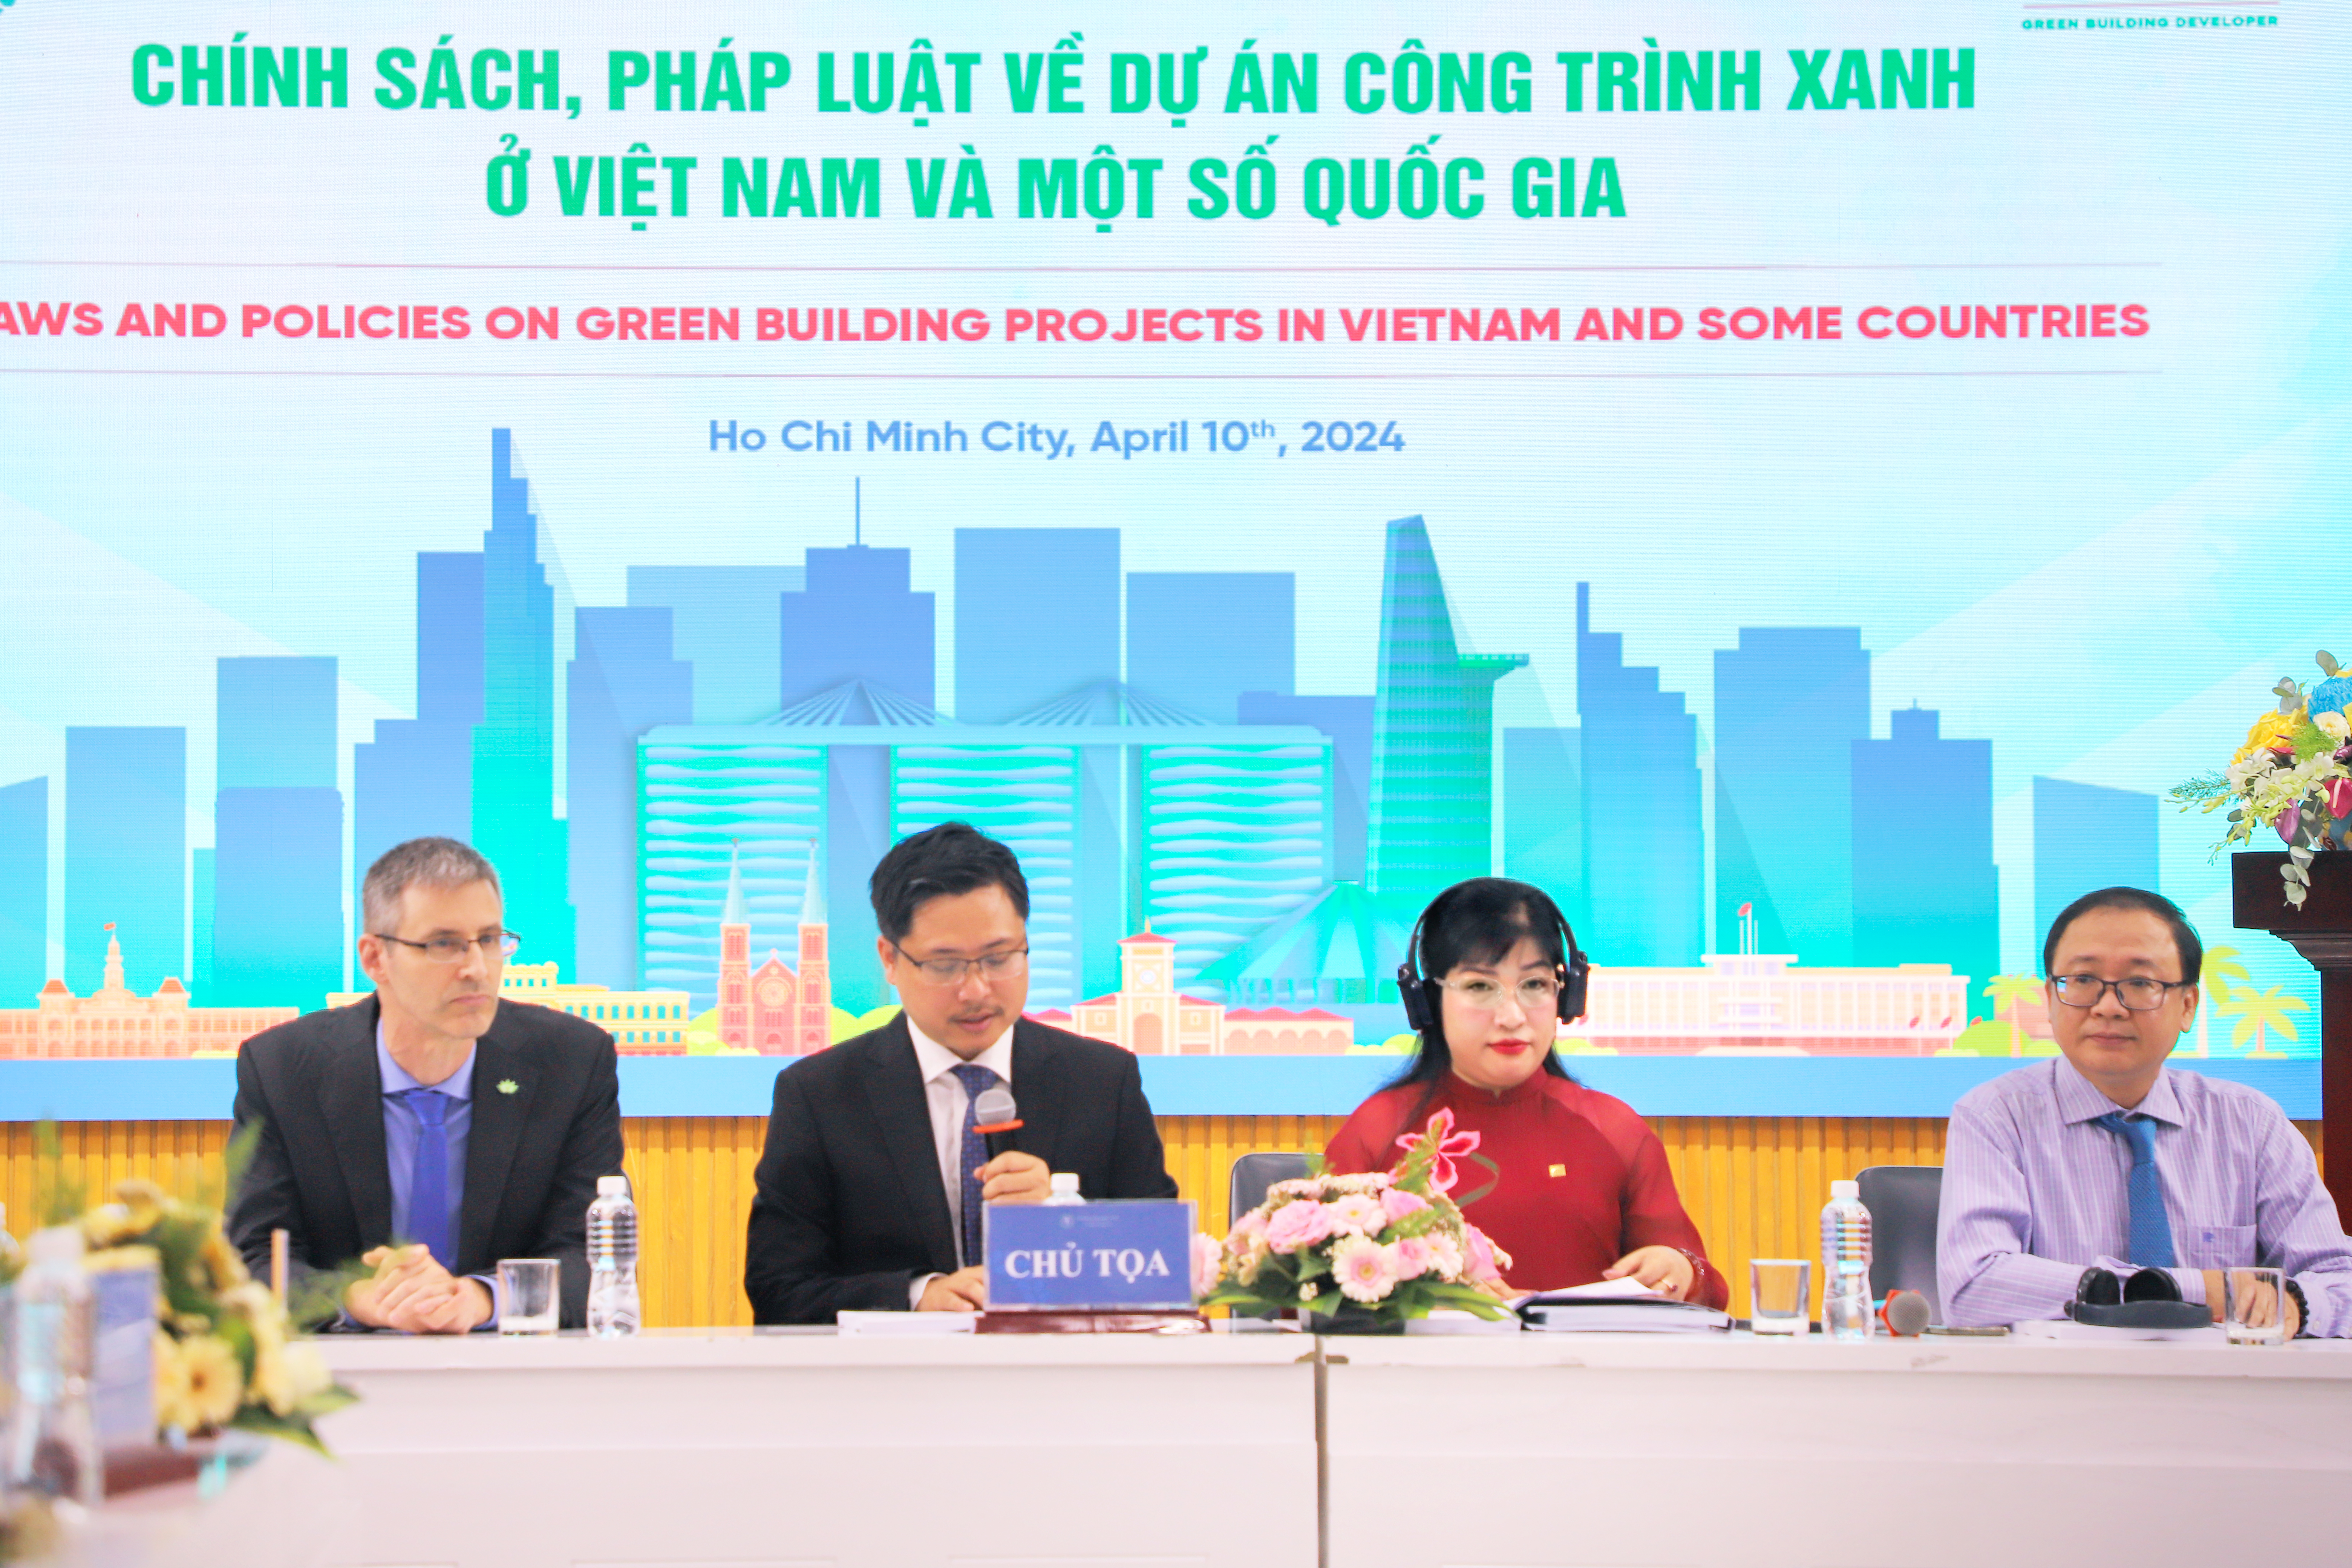 CEO Luu Thi Thanh Mau (in red suit) and experts at the conference.